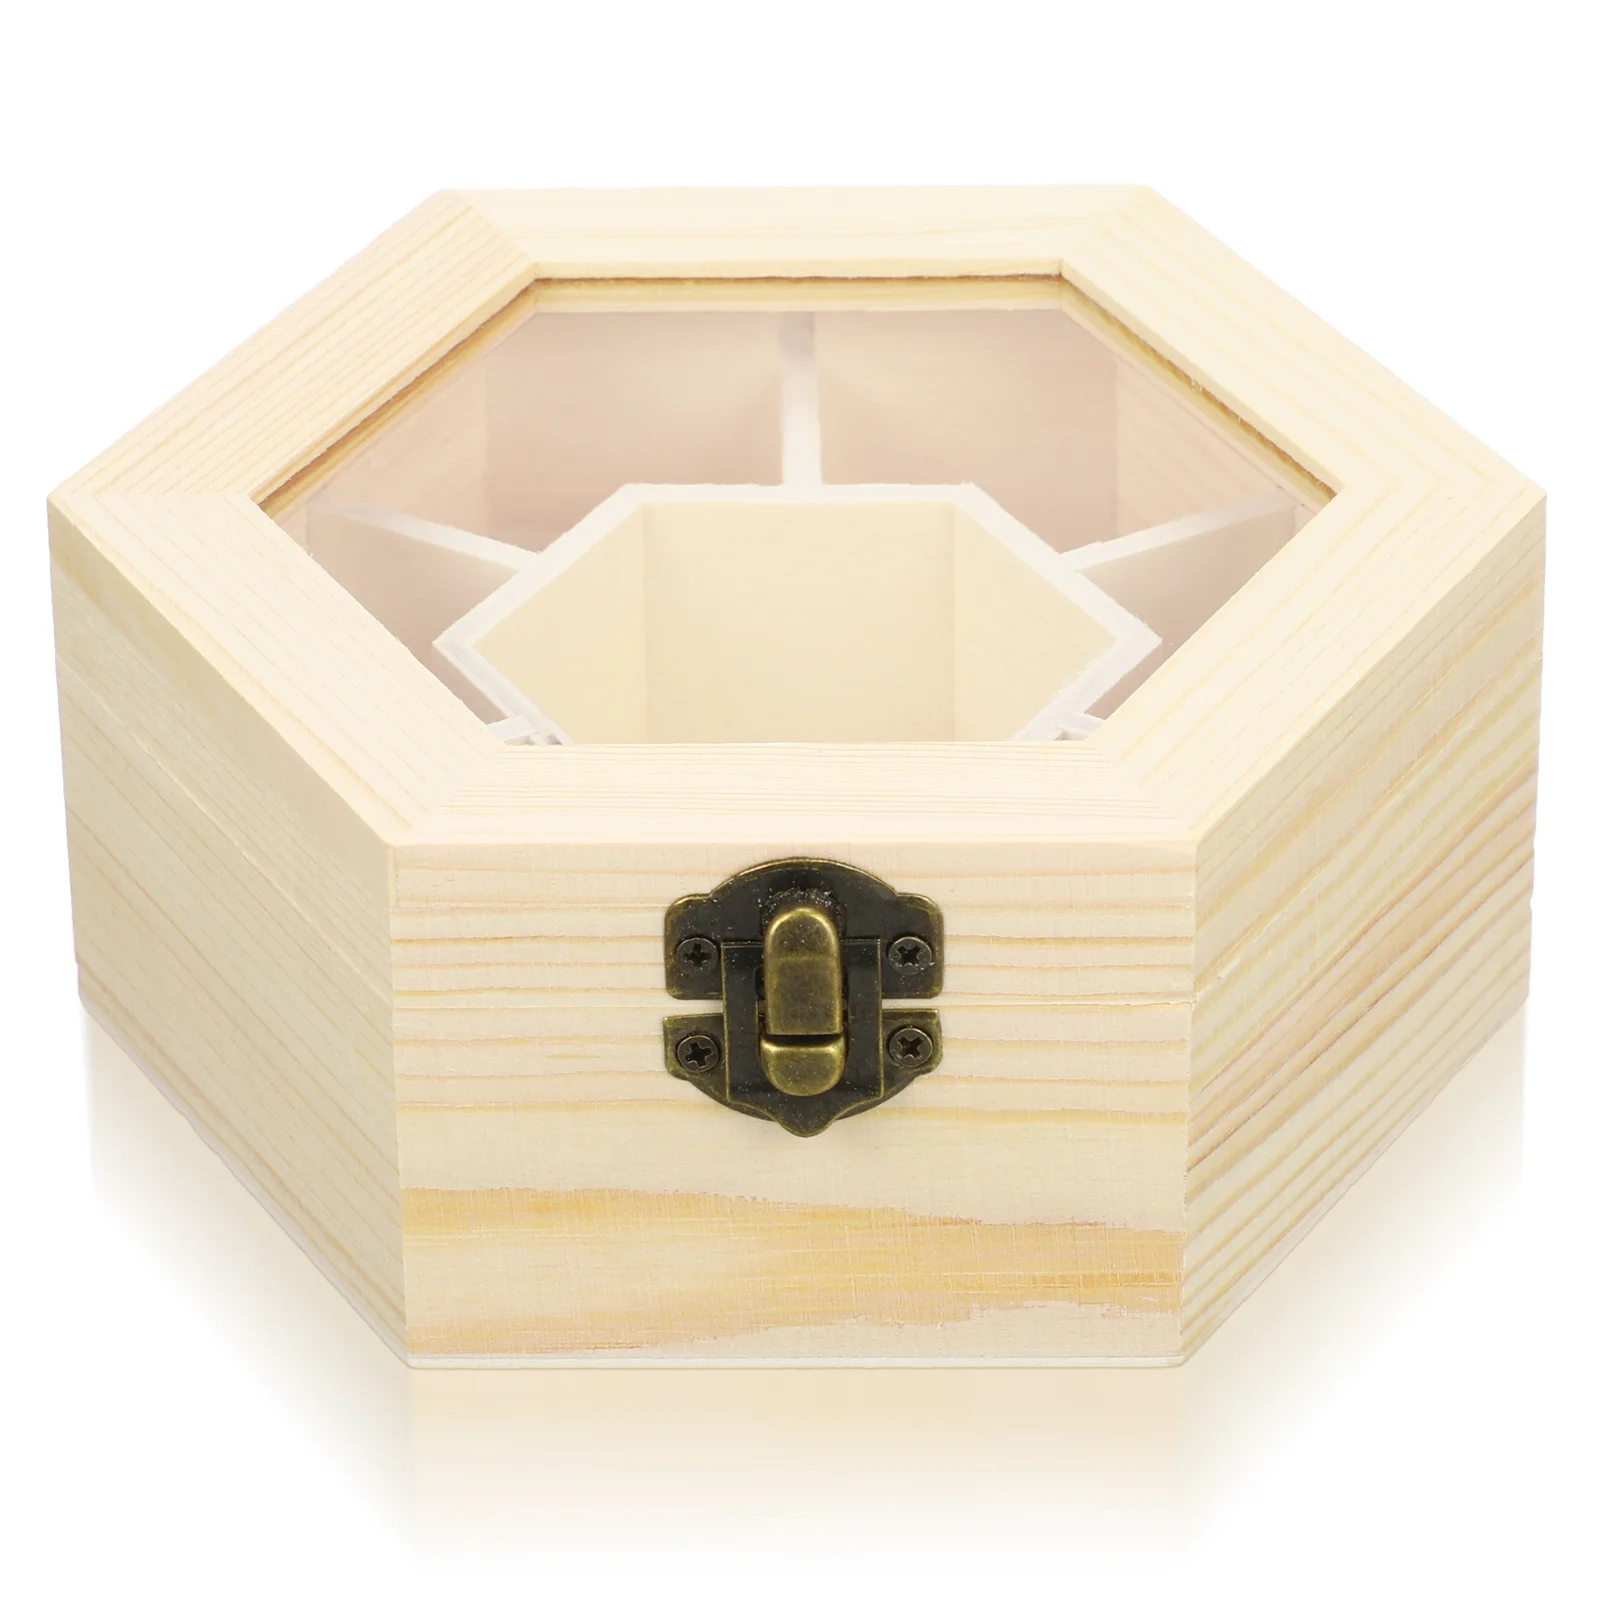 

New Natural Plain Wooden Jewellery Crafts Storage Box With Glass Lid and Lock Hexagon Shaped Chest Storage Collection Box